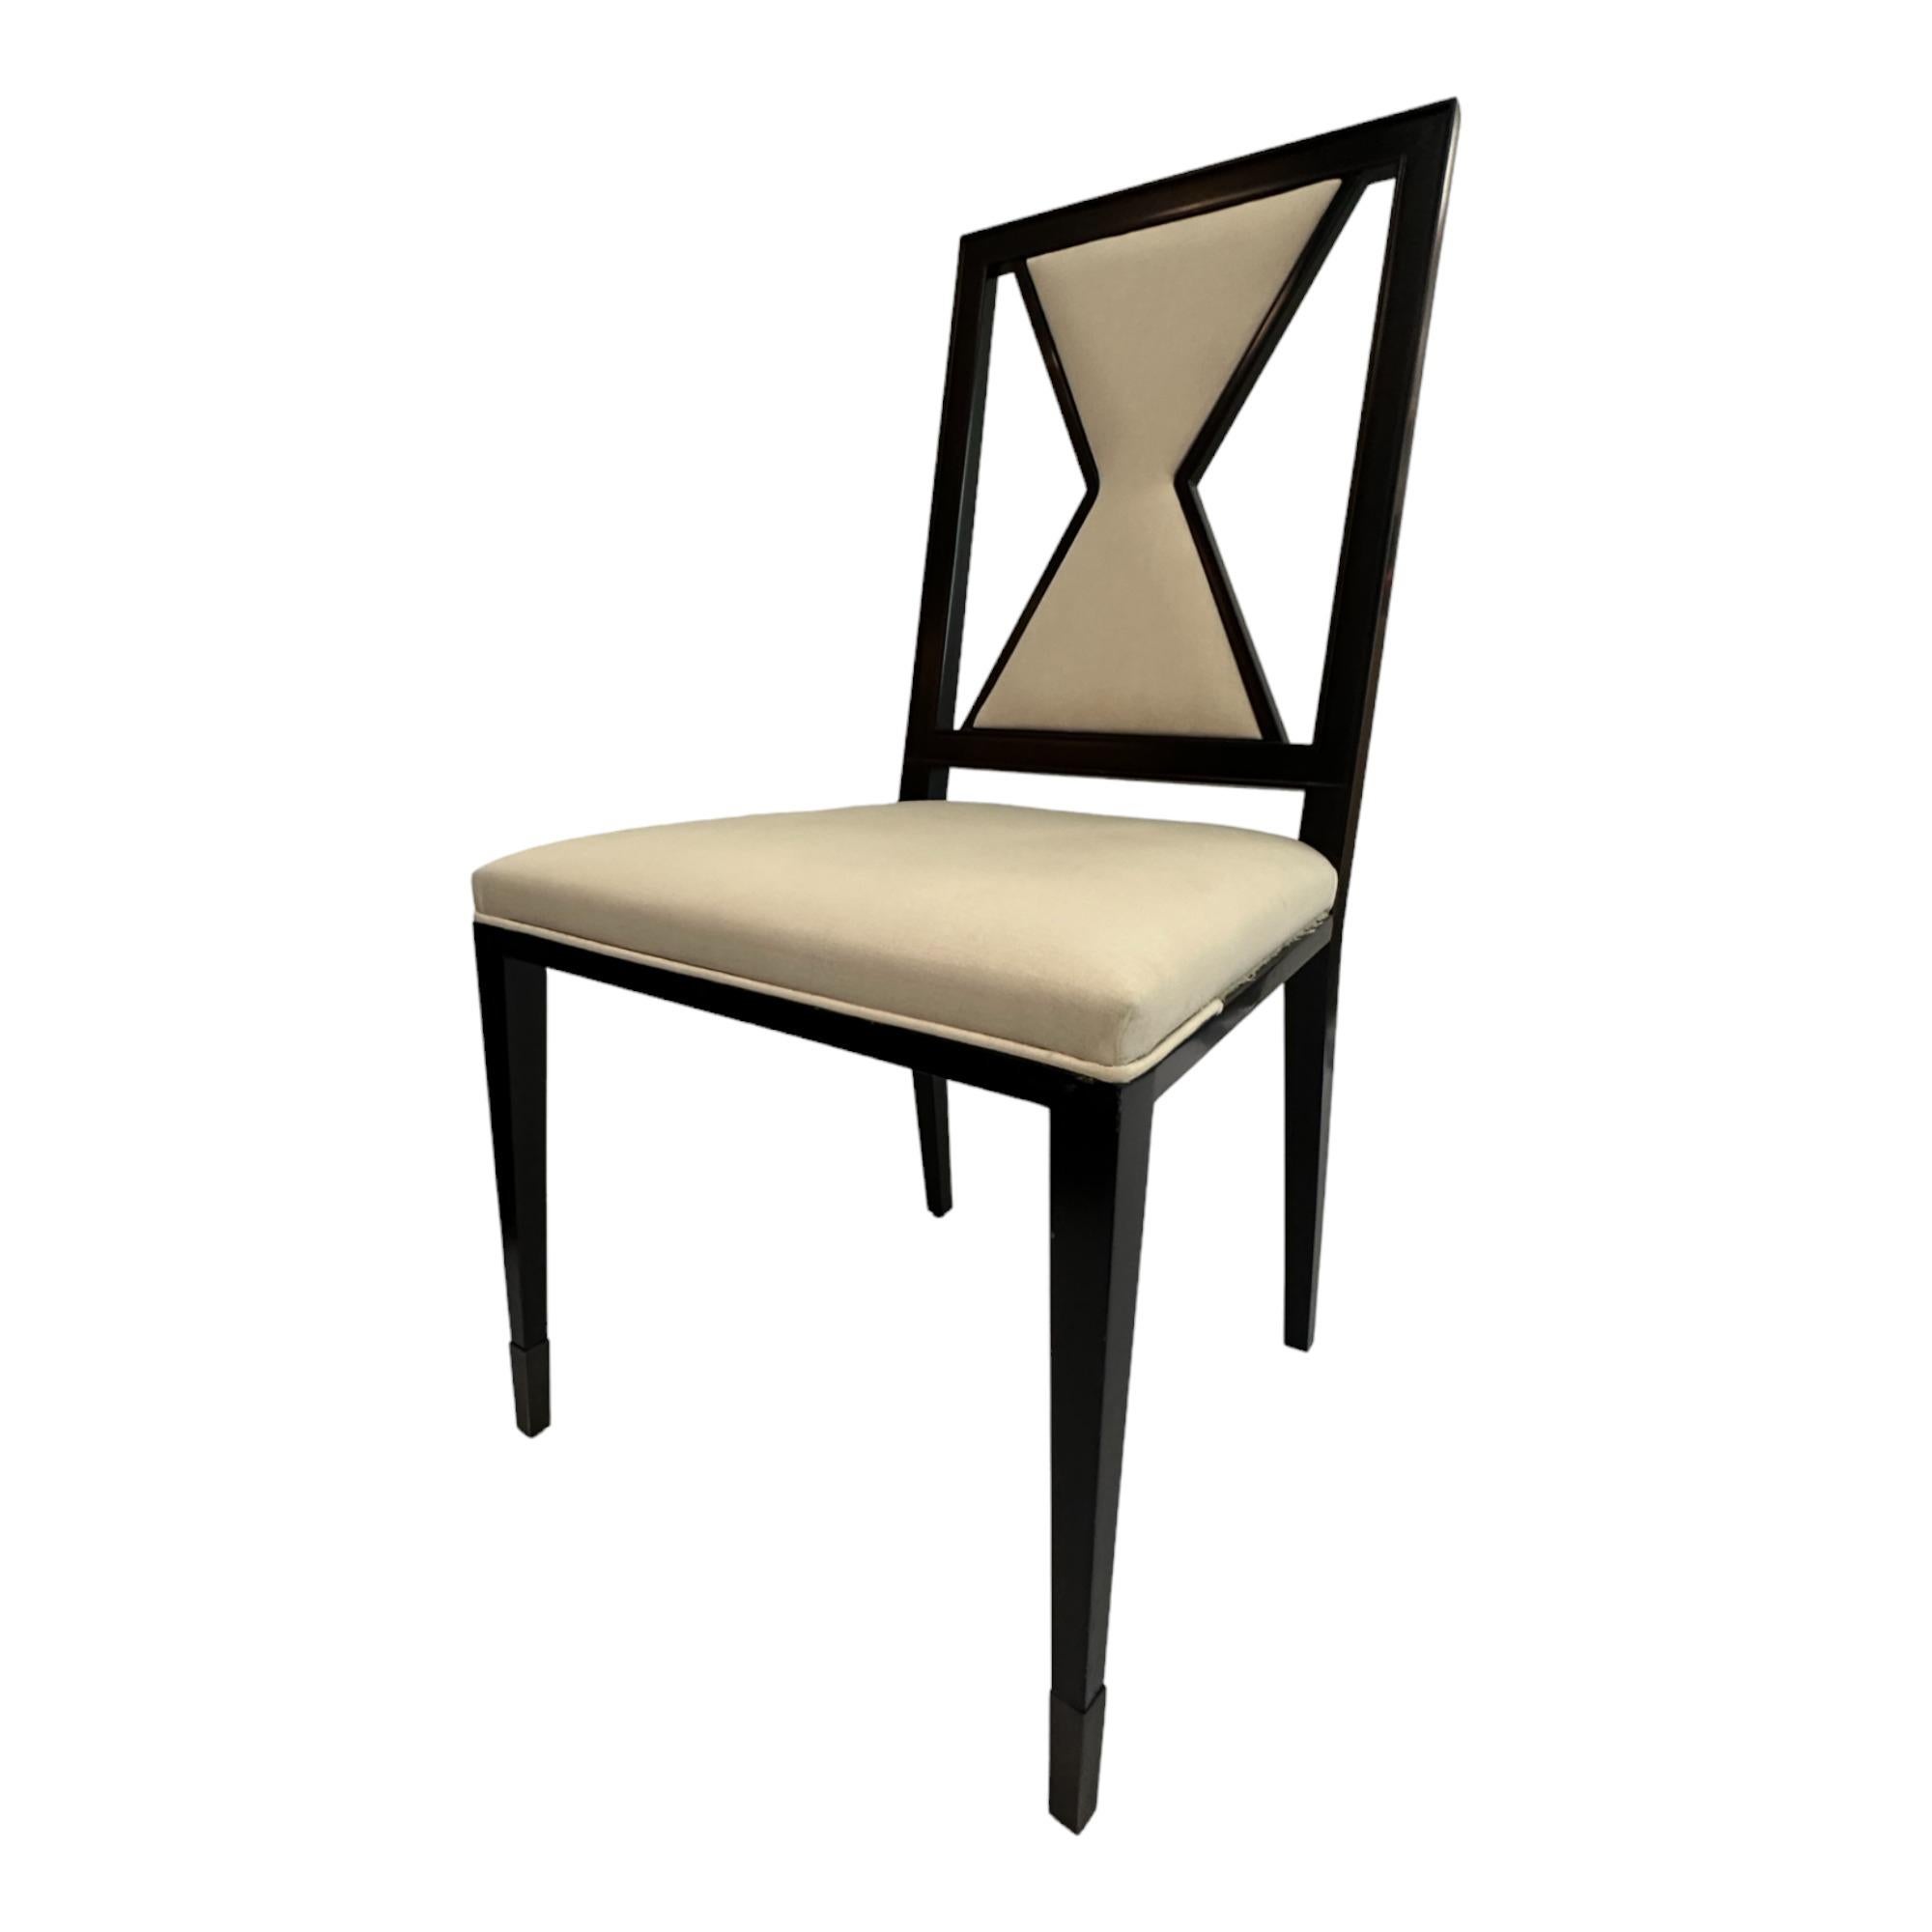 Lacquered Contemporary Wooden Chair with Geometrical Backrest by Juan Montoya For Sale